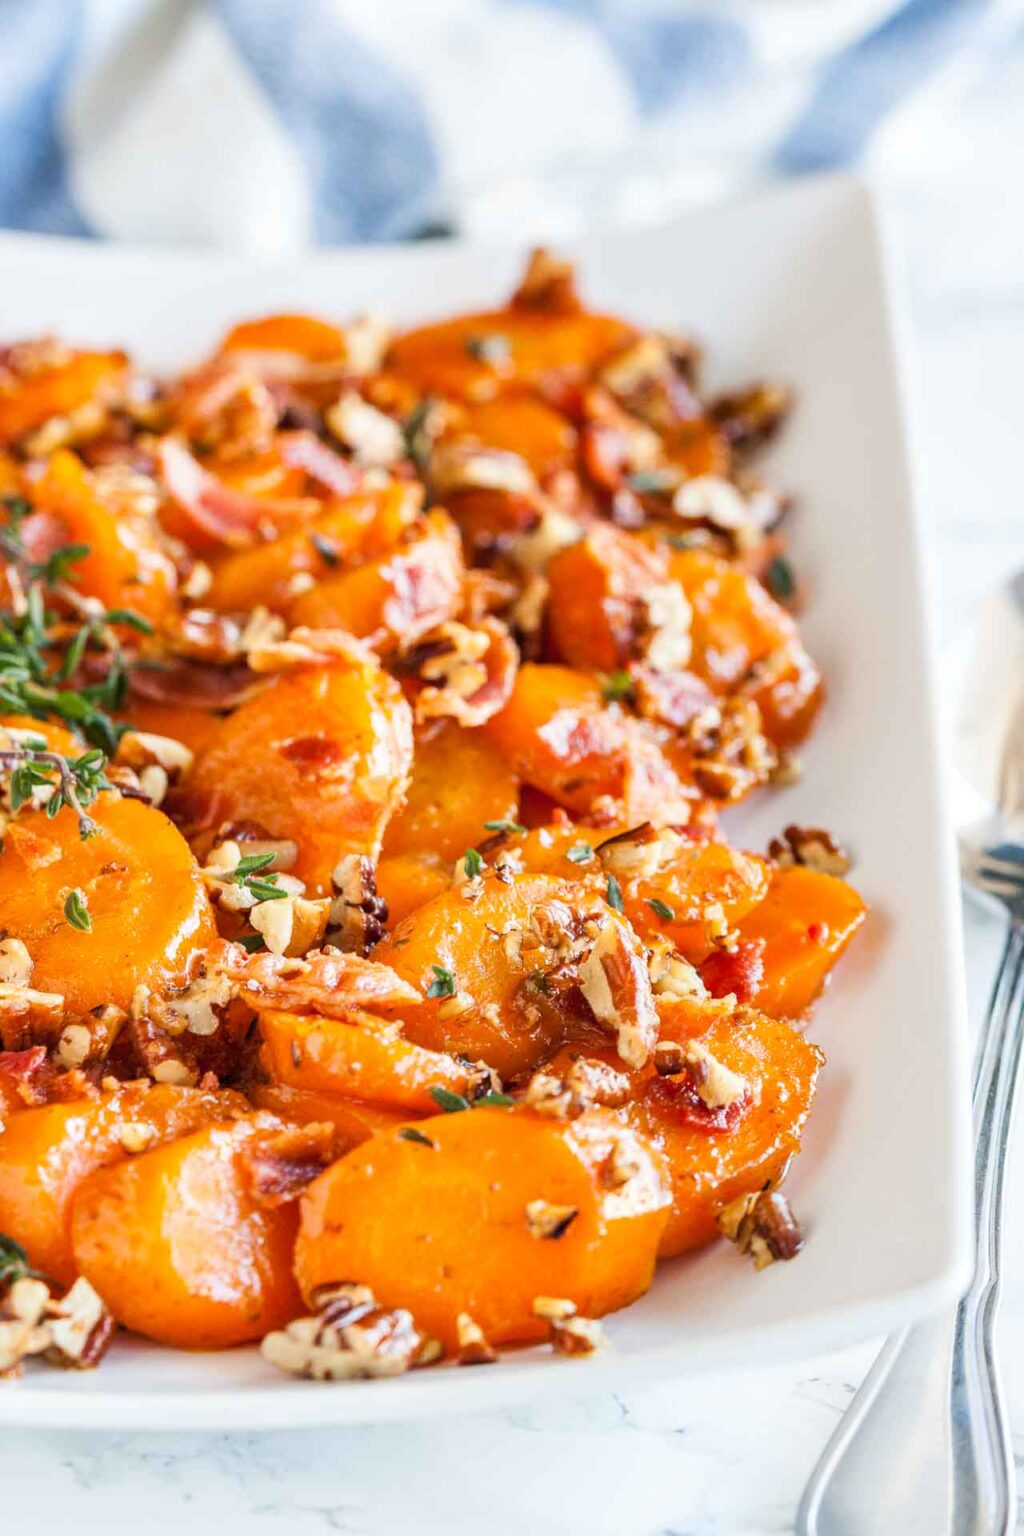 Brown Sugar Glazed Carrots Recipe with Bacon and Toasted Pecans